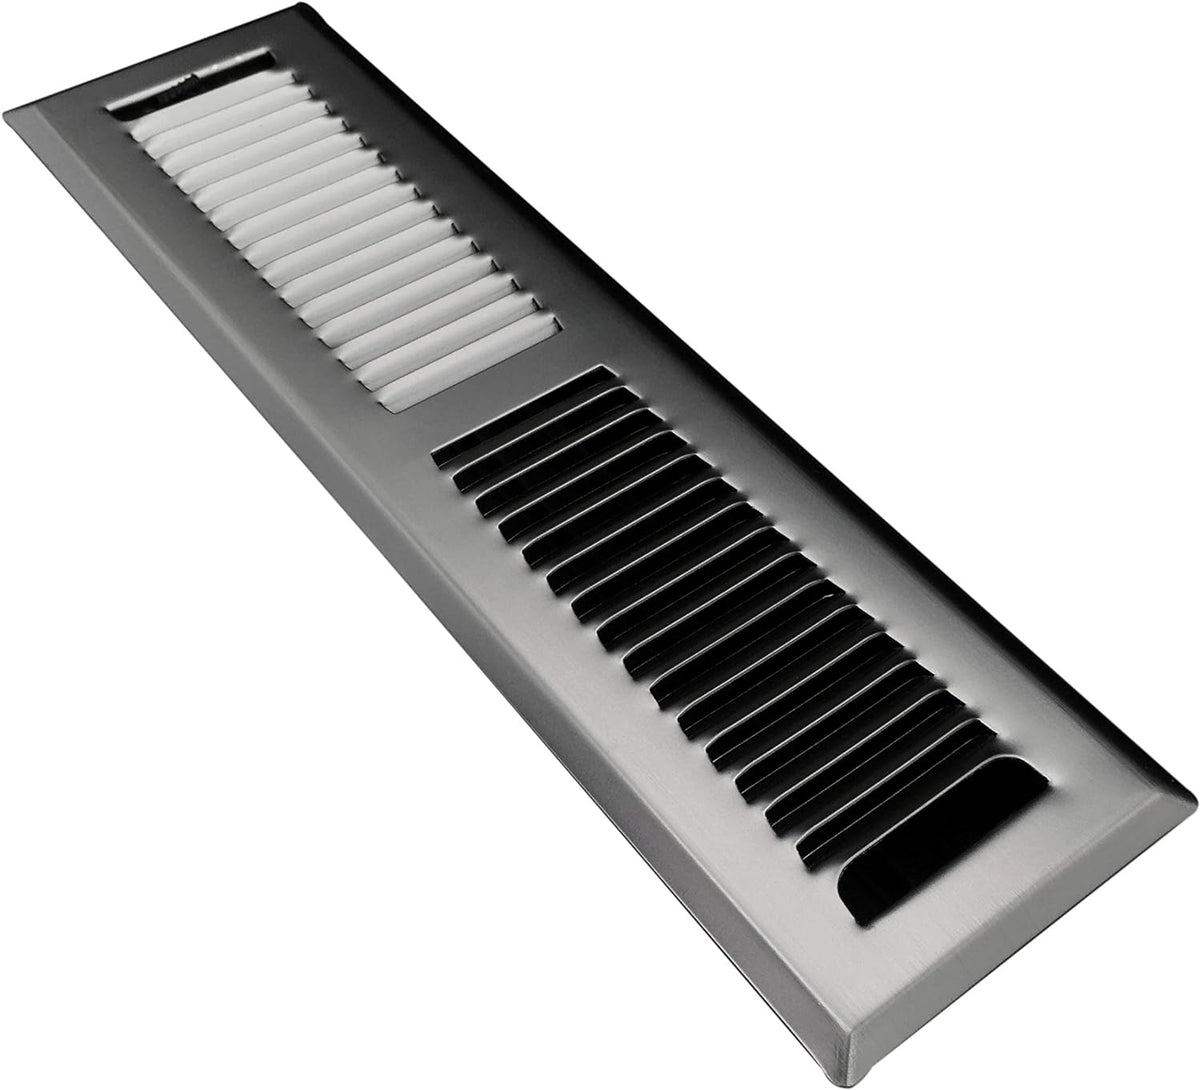 2&quot; X 12&quot; Victorian Floor Register Grille with Dampers - Contempo Decorative Grate - HVAC Vent Duct Cover - Satin Nickel